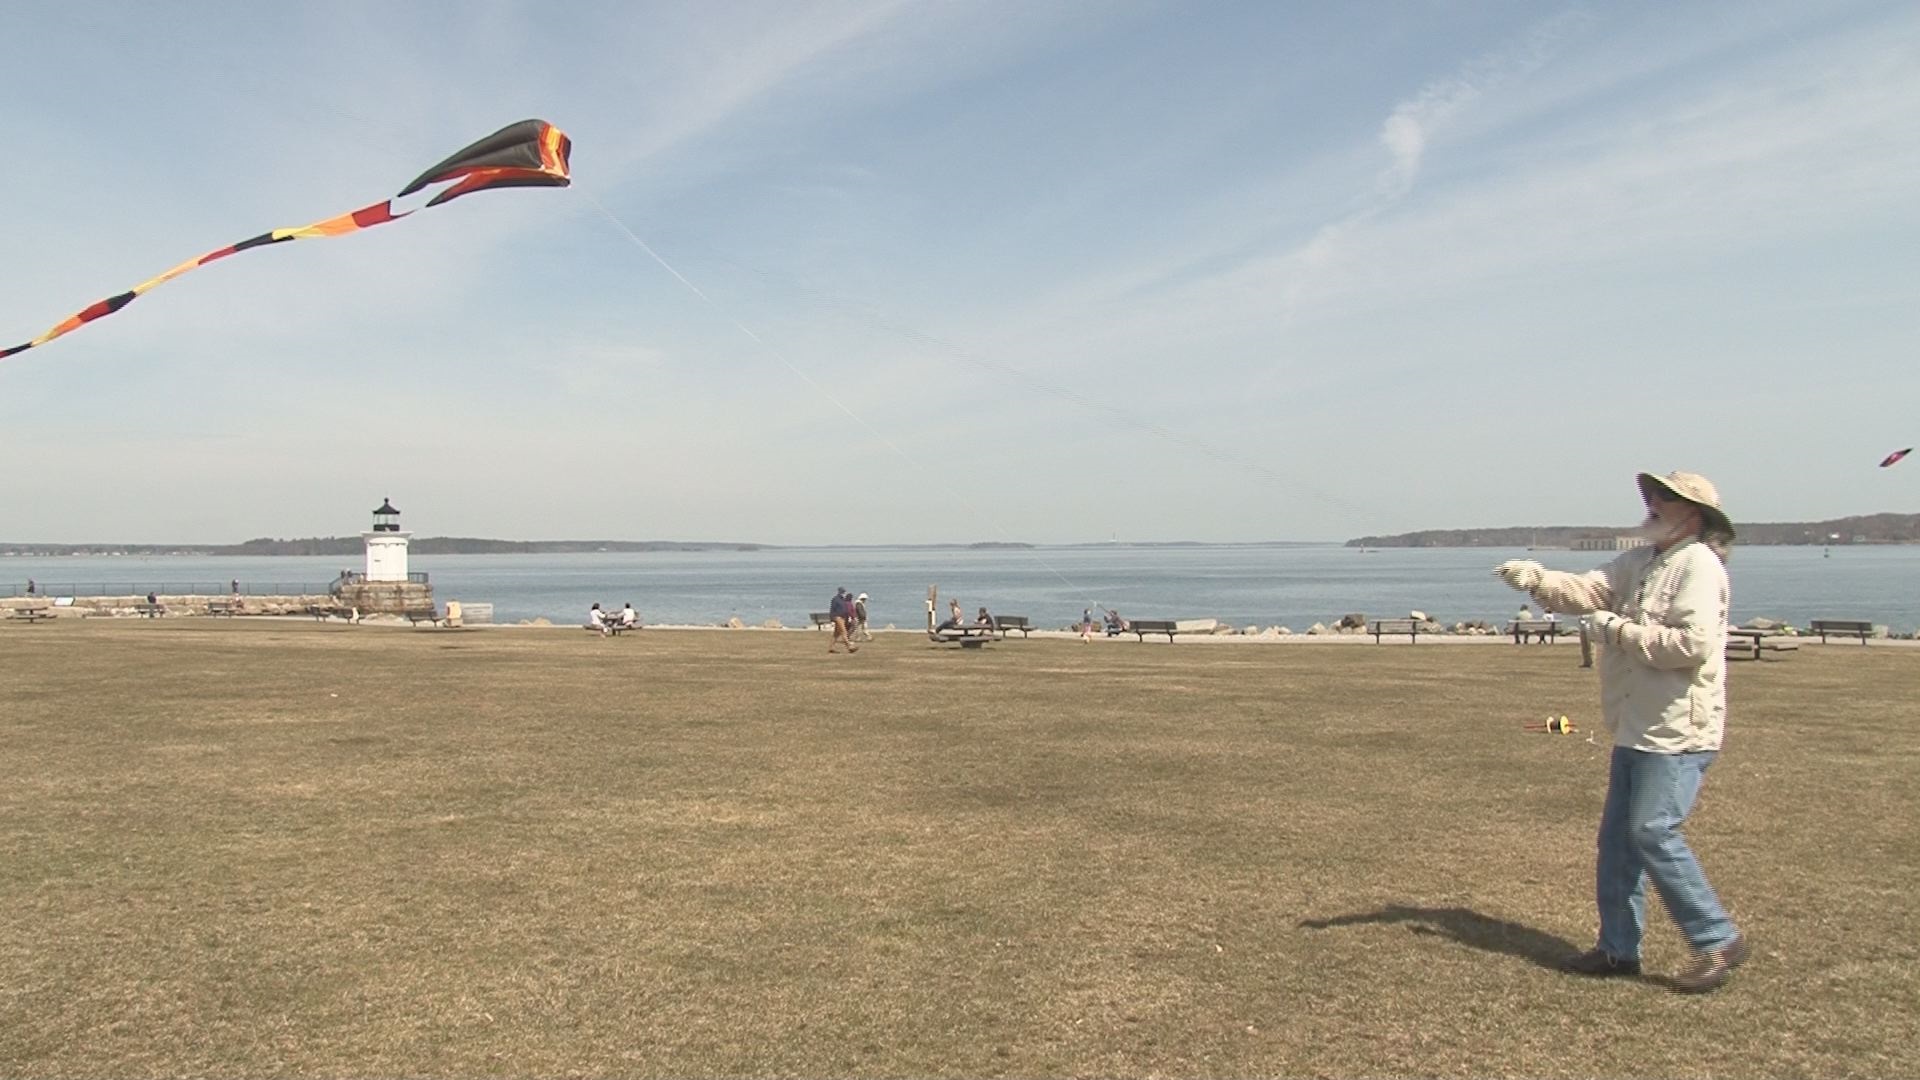 The fun of kite flying and crafting - WCSH-TV